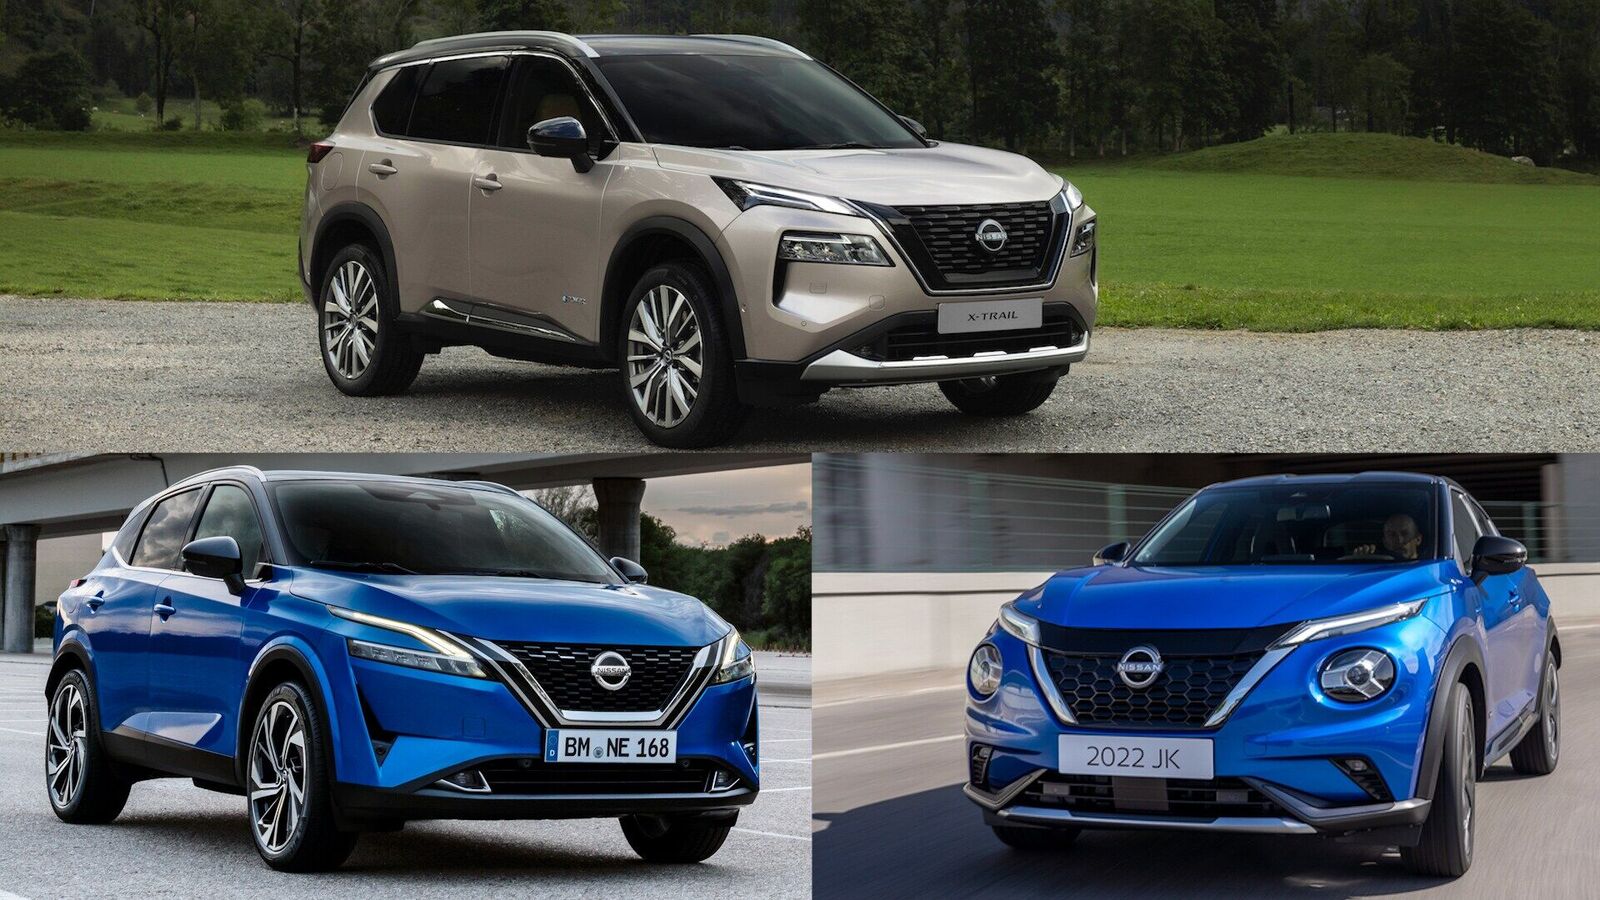 Nissan reports sales of 10,519 units in March, will launch X-Trail SUV in India | HT Auto